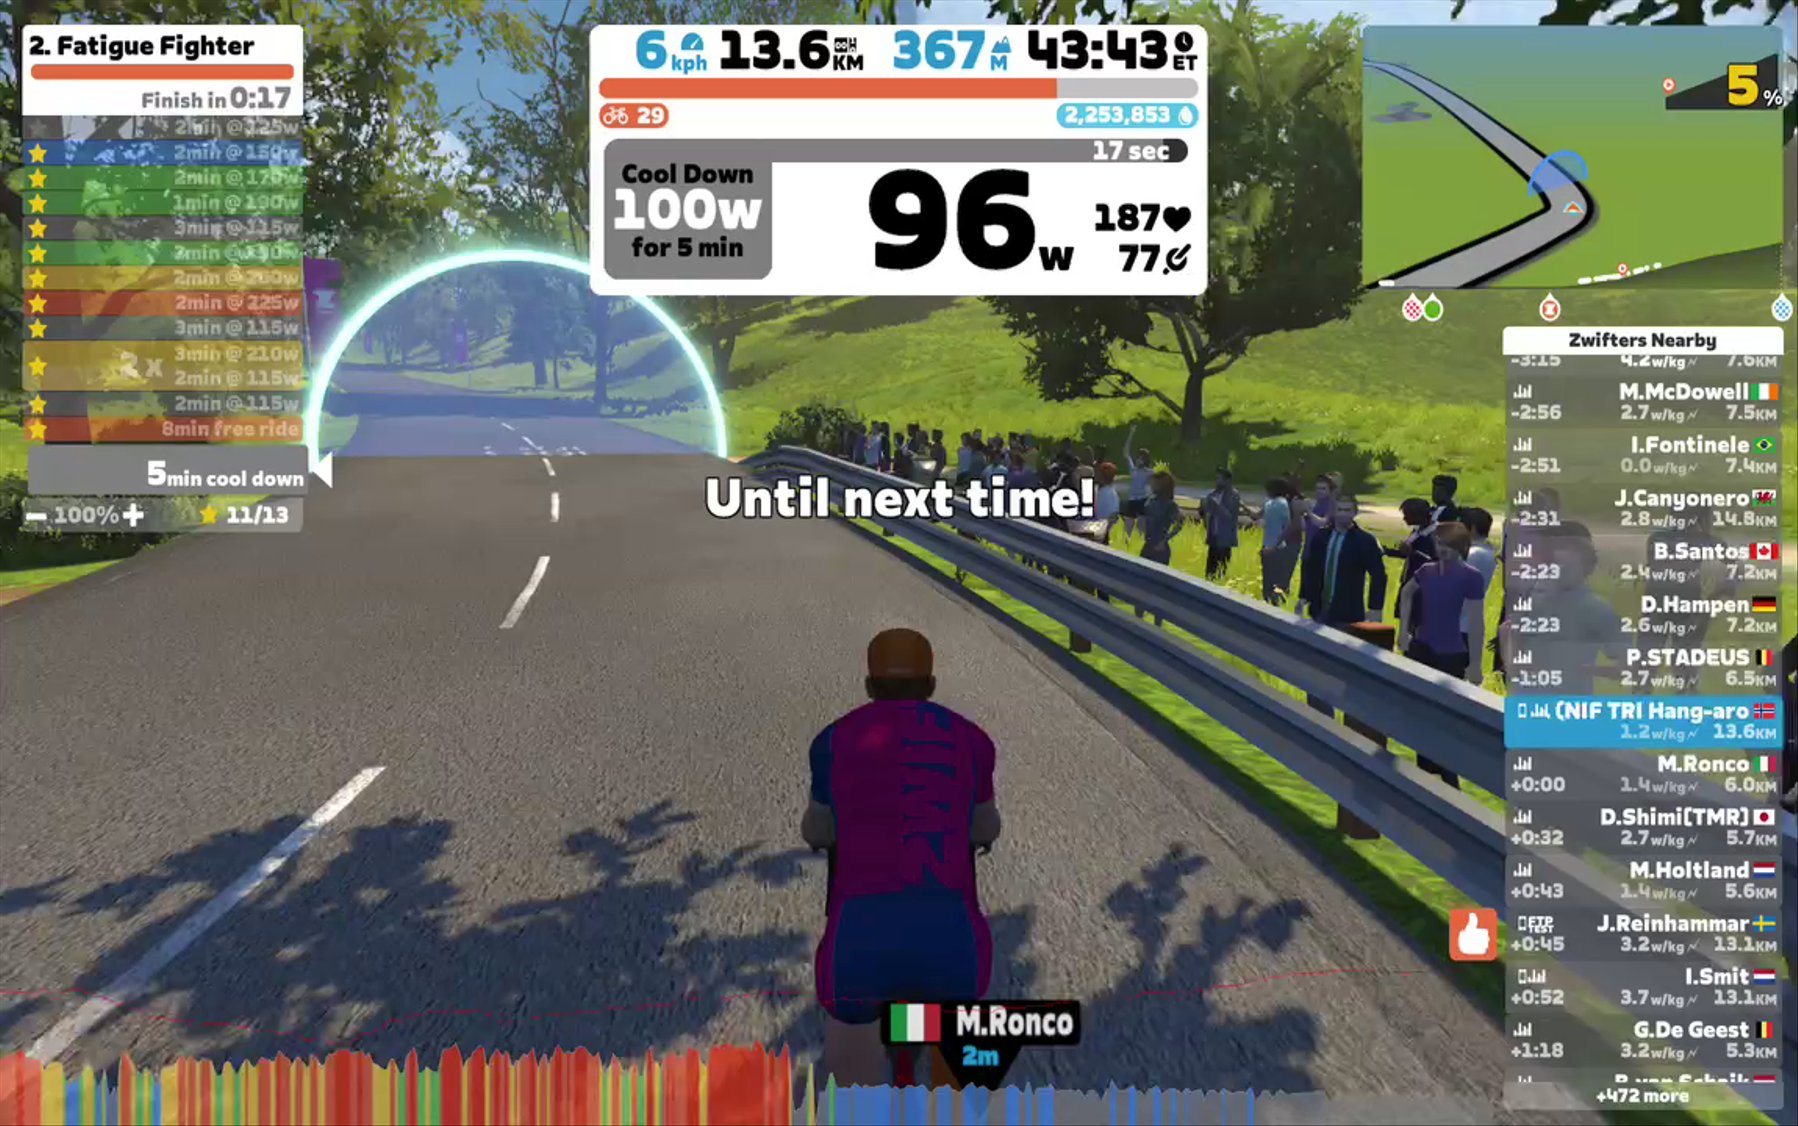 Zwift - Zwift Academy: Workout 2 | Fatigue Fighter in France